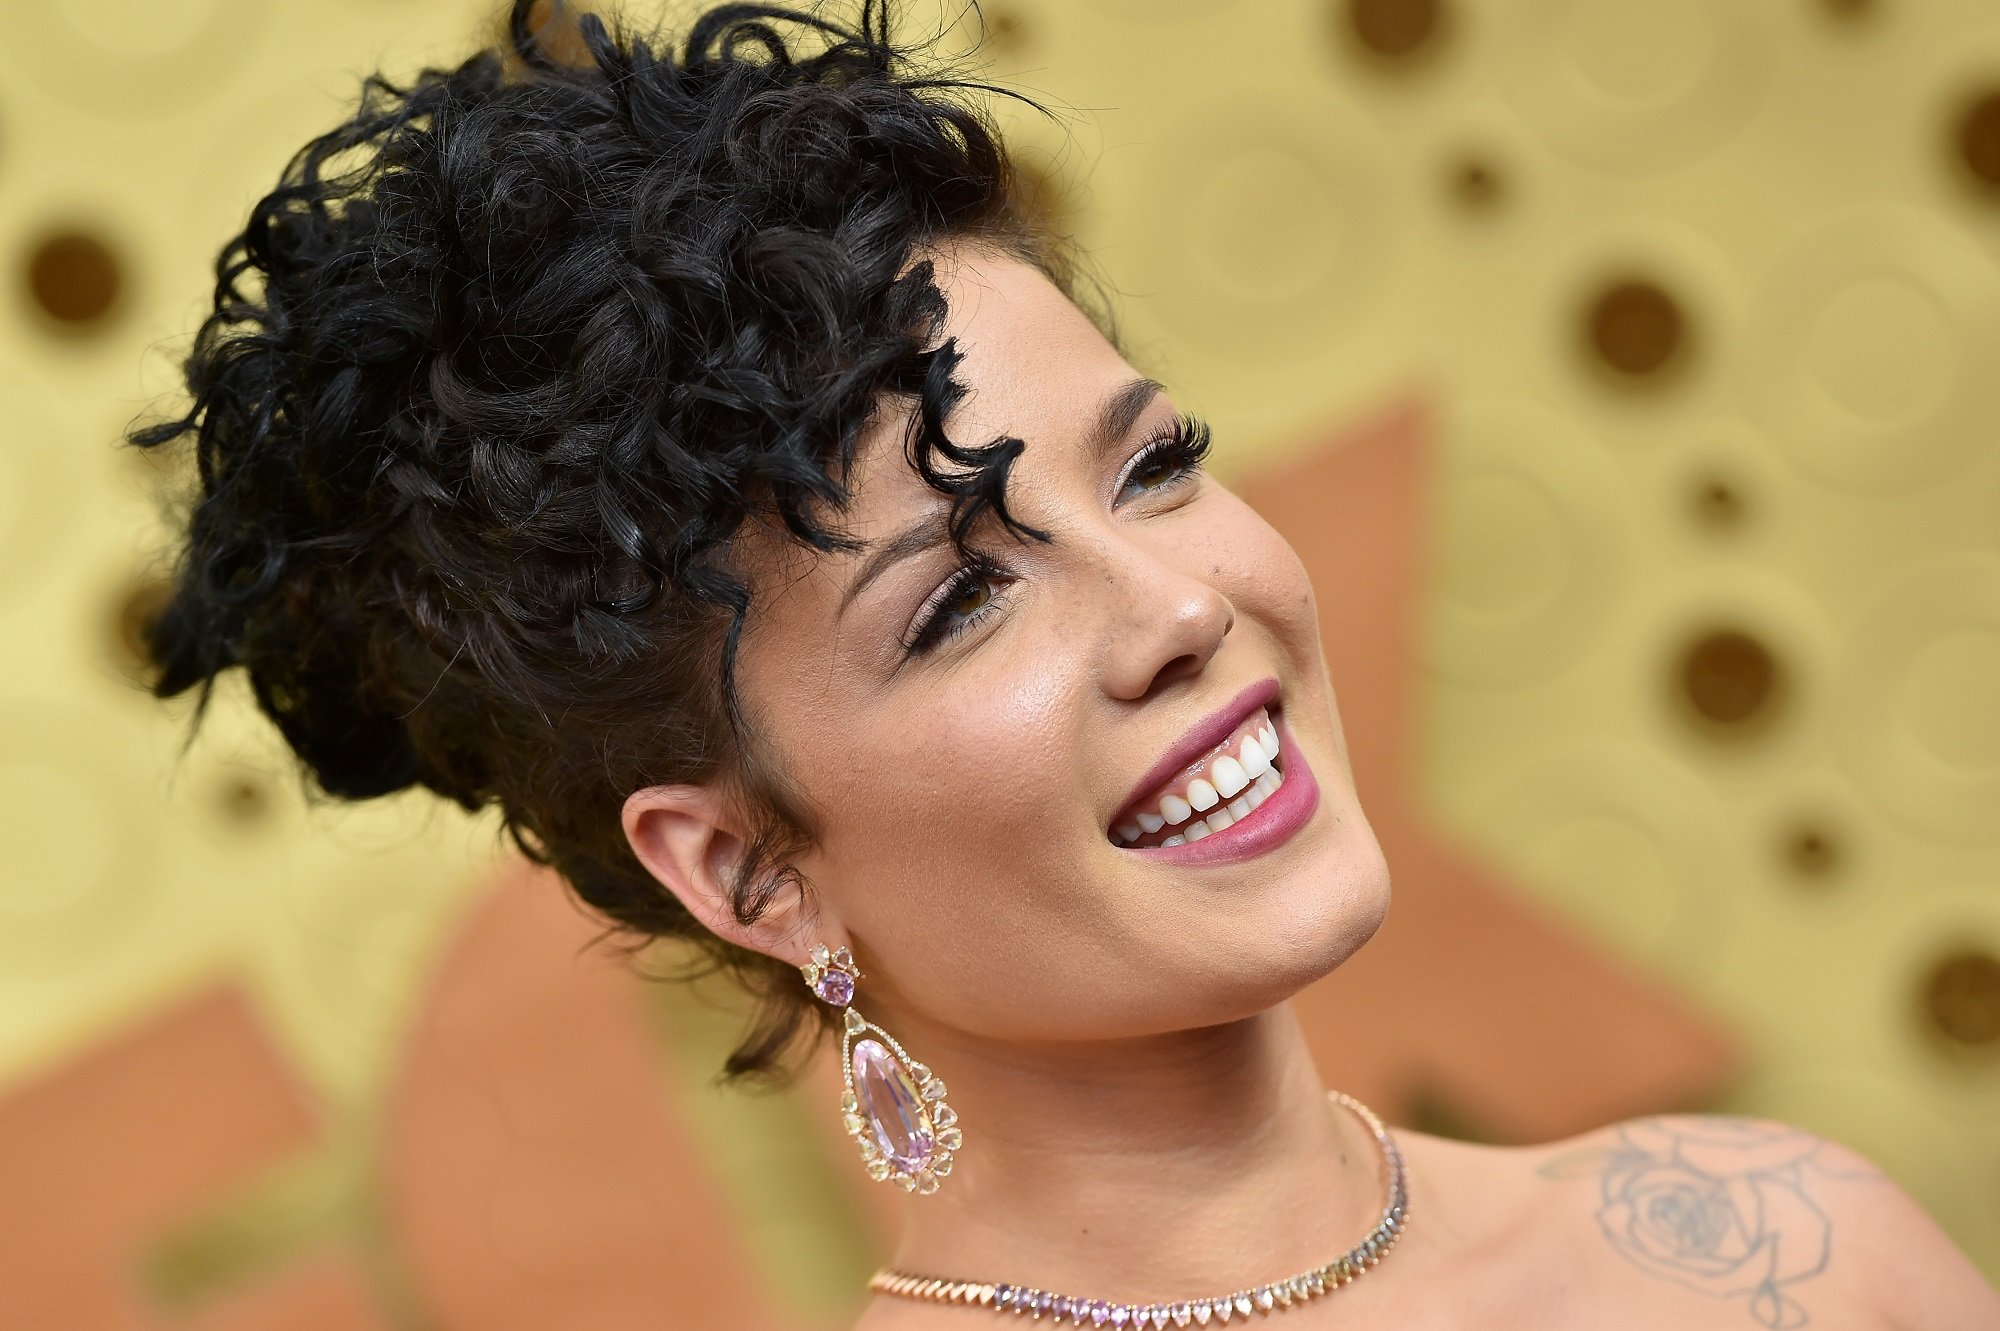 Halsey smiles while attending the 71st Emmy Awards in 2019